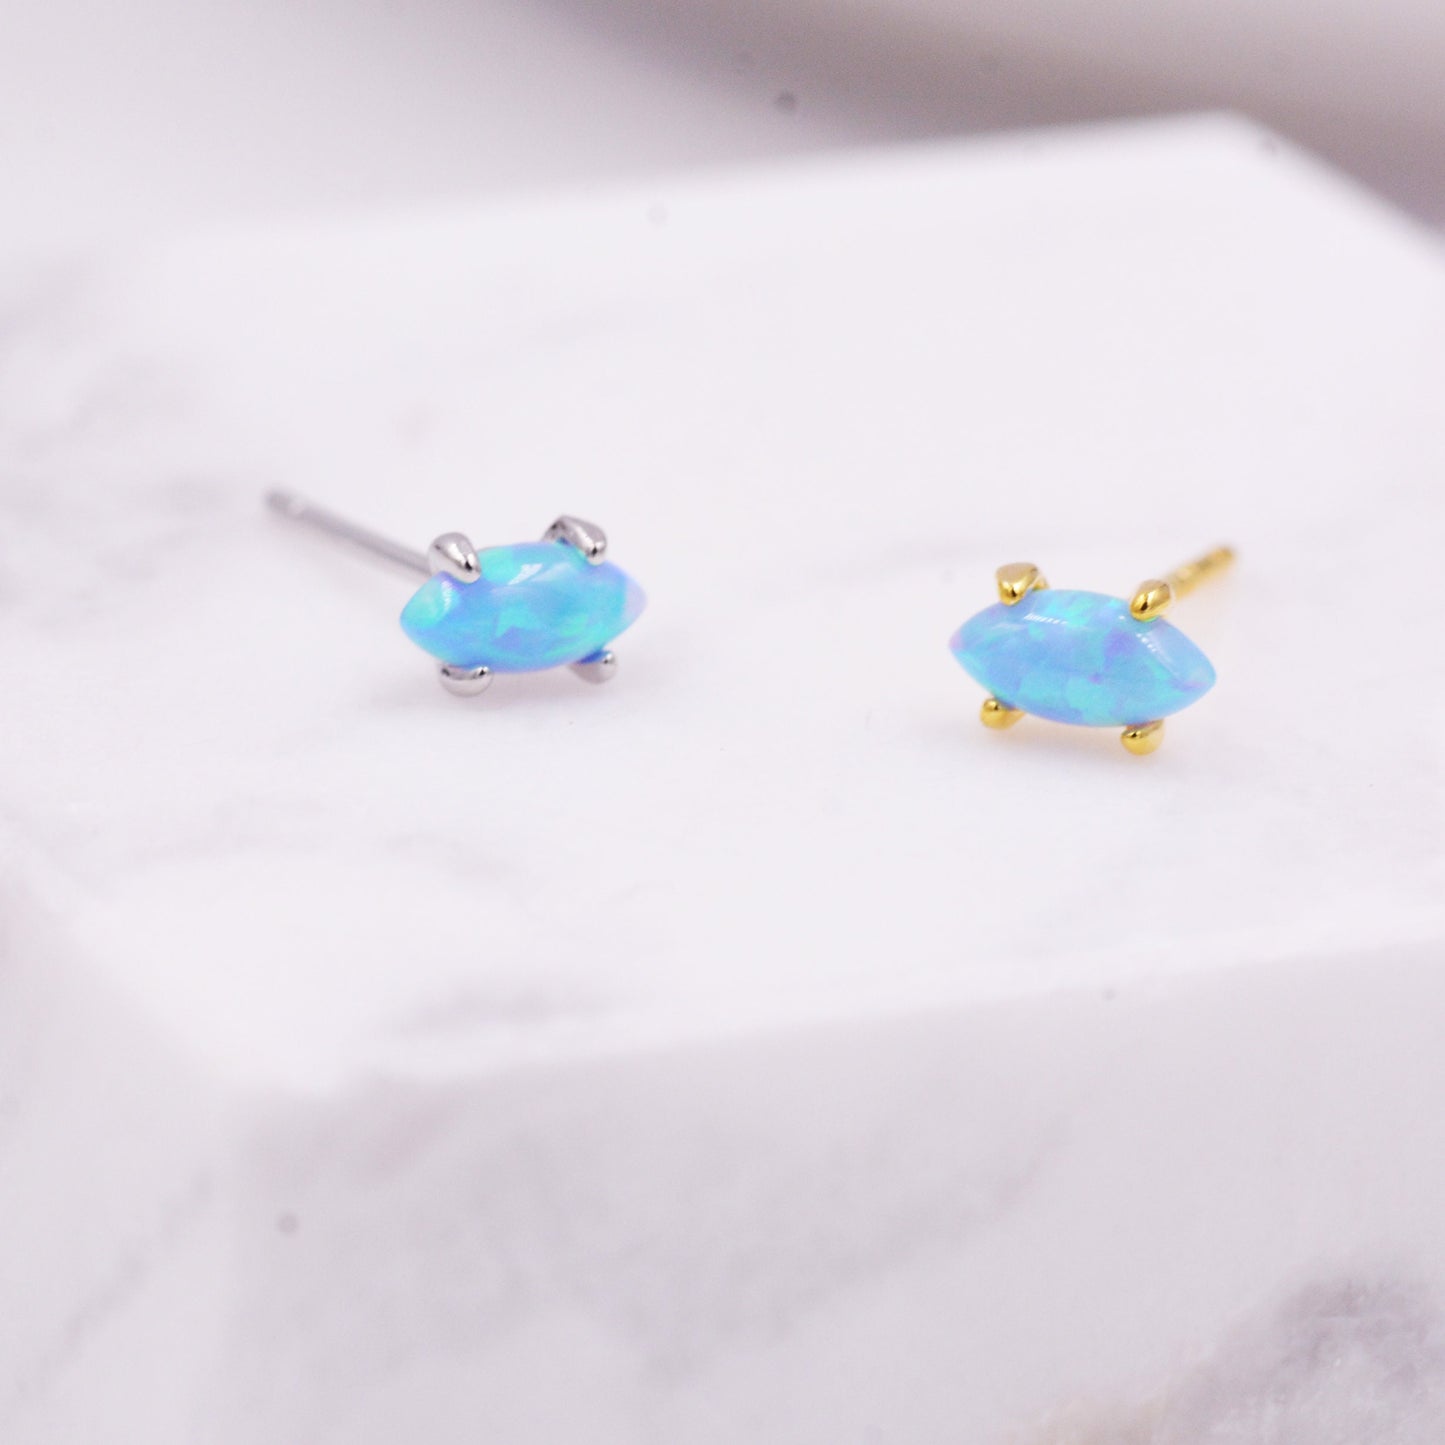 Sterling Silver Tiny Opal Marquise Stud Earrings,Gold or Silver, Minimalist Geometric Design